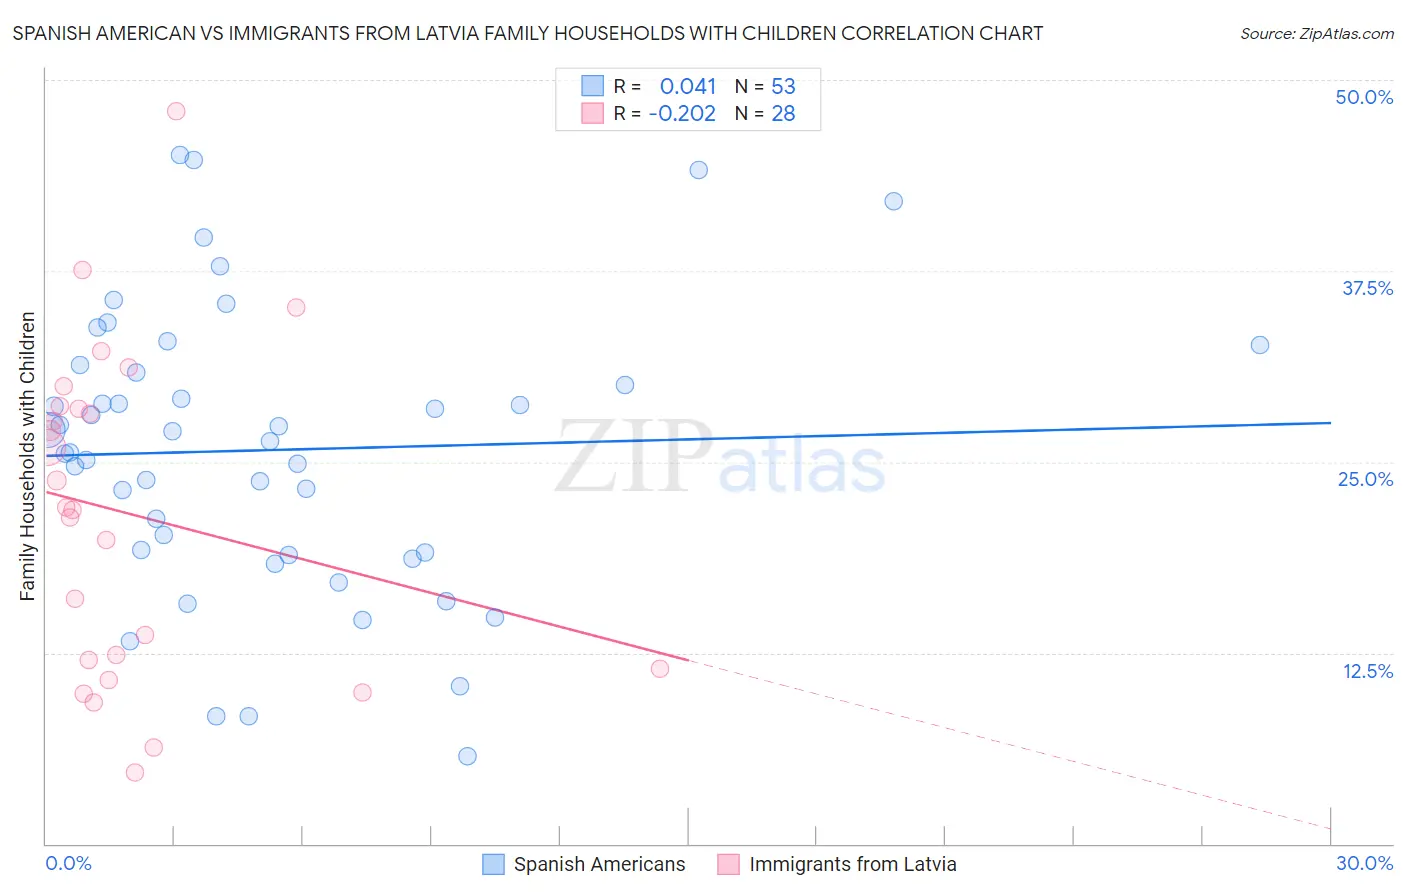 Spanish American vs Immigrants from Latvia Family Households with Children